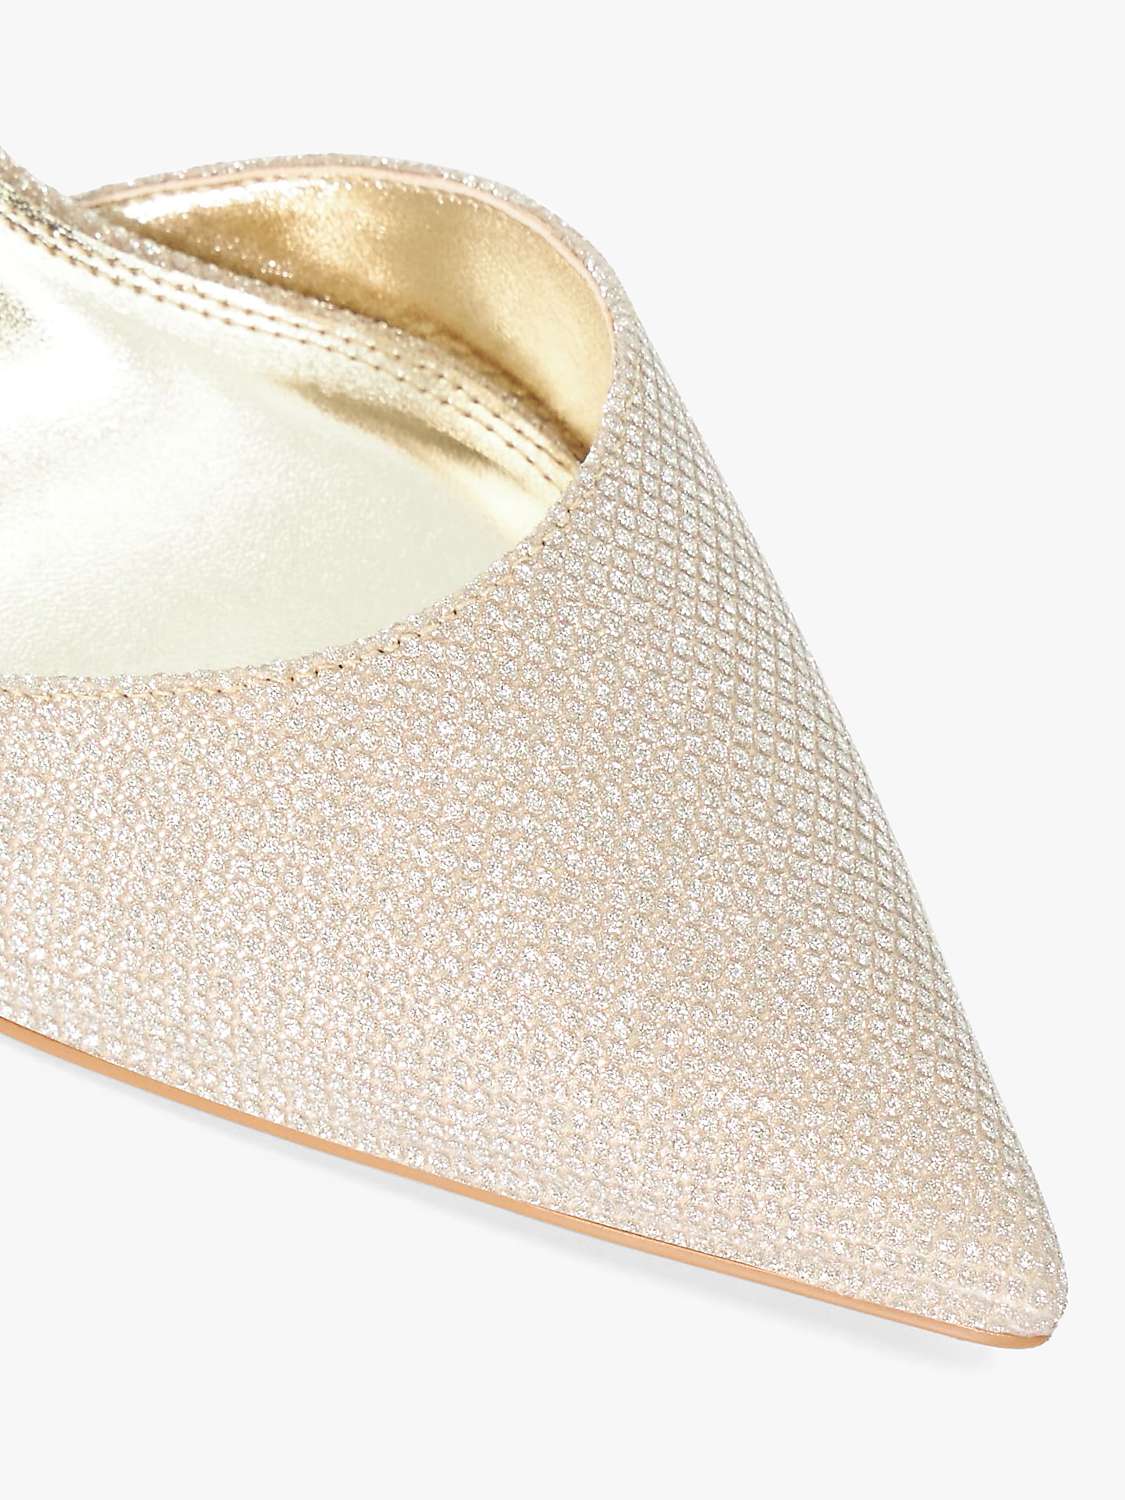 Buy Dune Classical Elasticated Court Shoes, Gold Online at johnlewis.com